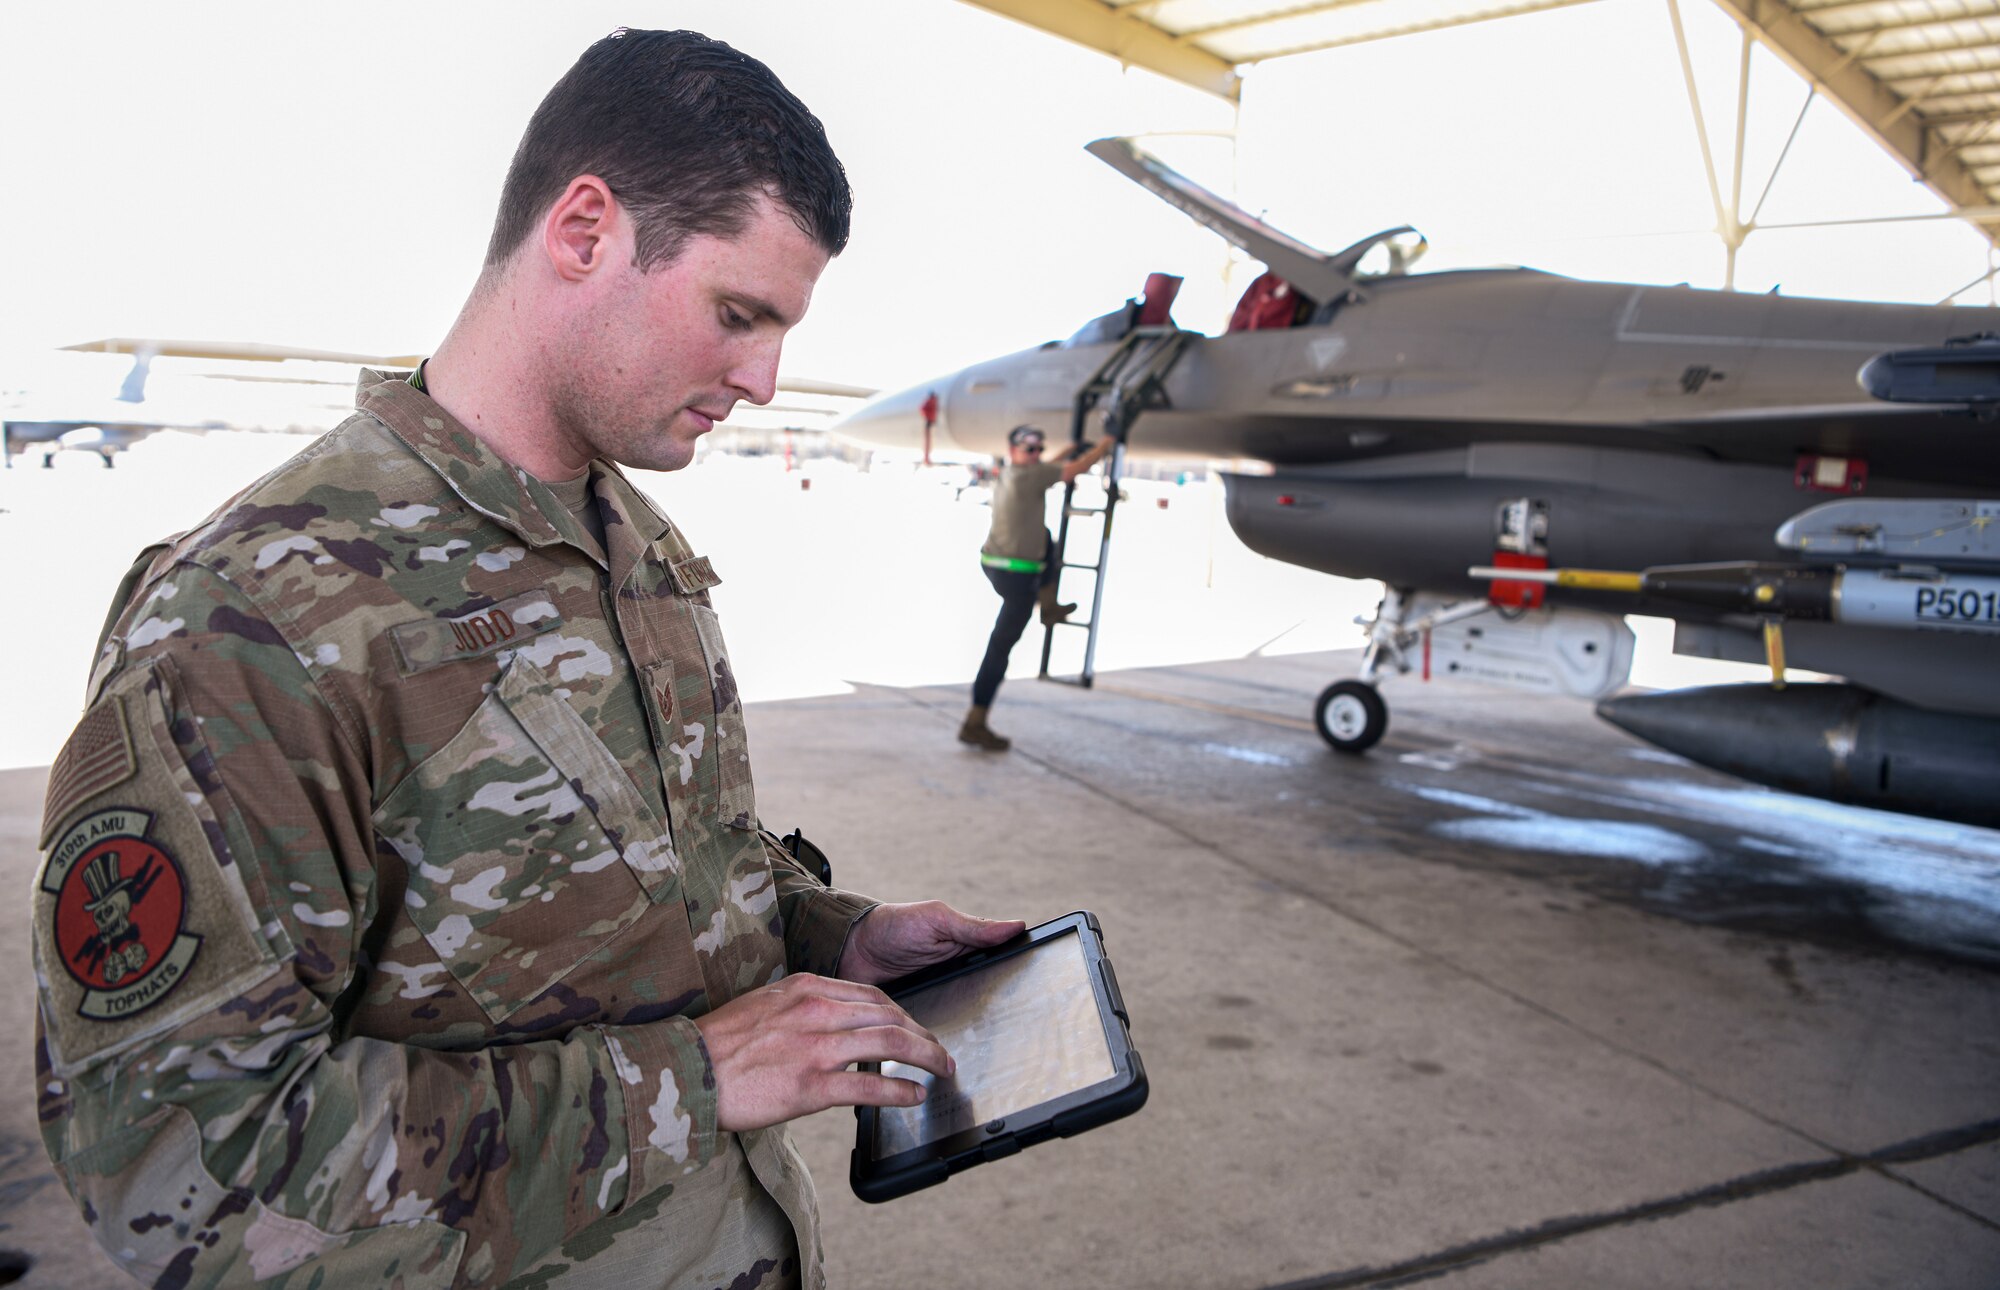 Tech. Sgt. Jonathan Judd, 310th Aircraft Maintenance Unit flight line expediter, uses the KILA app May 14th, 2021, at Luke Air Force Base, Arizona. The app has been in use at Luke AFB since March 24th, 2021, and has revolutionized the launch and recovery process for the F-35A Lightning II and F-16 Fighting Falcon aircraft. Through streamlined communication and new ways of completing the mission, the Air Force builds its lethality and teamwork to provide airpower anytime, anywhere. (U.S. Air Force photo by Airman 1st Class David C. Busby)